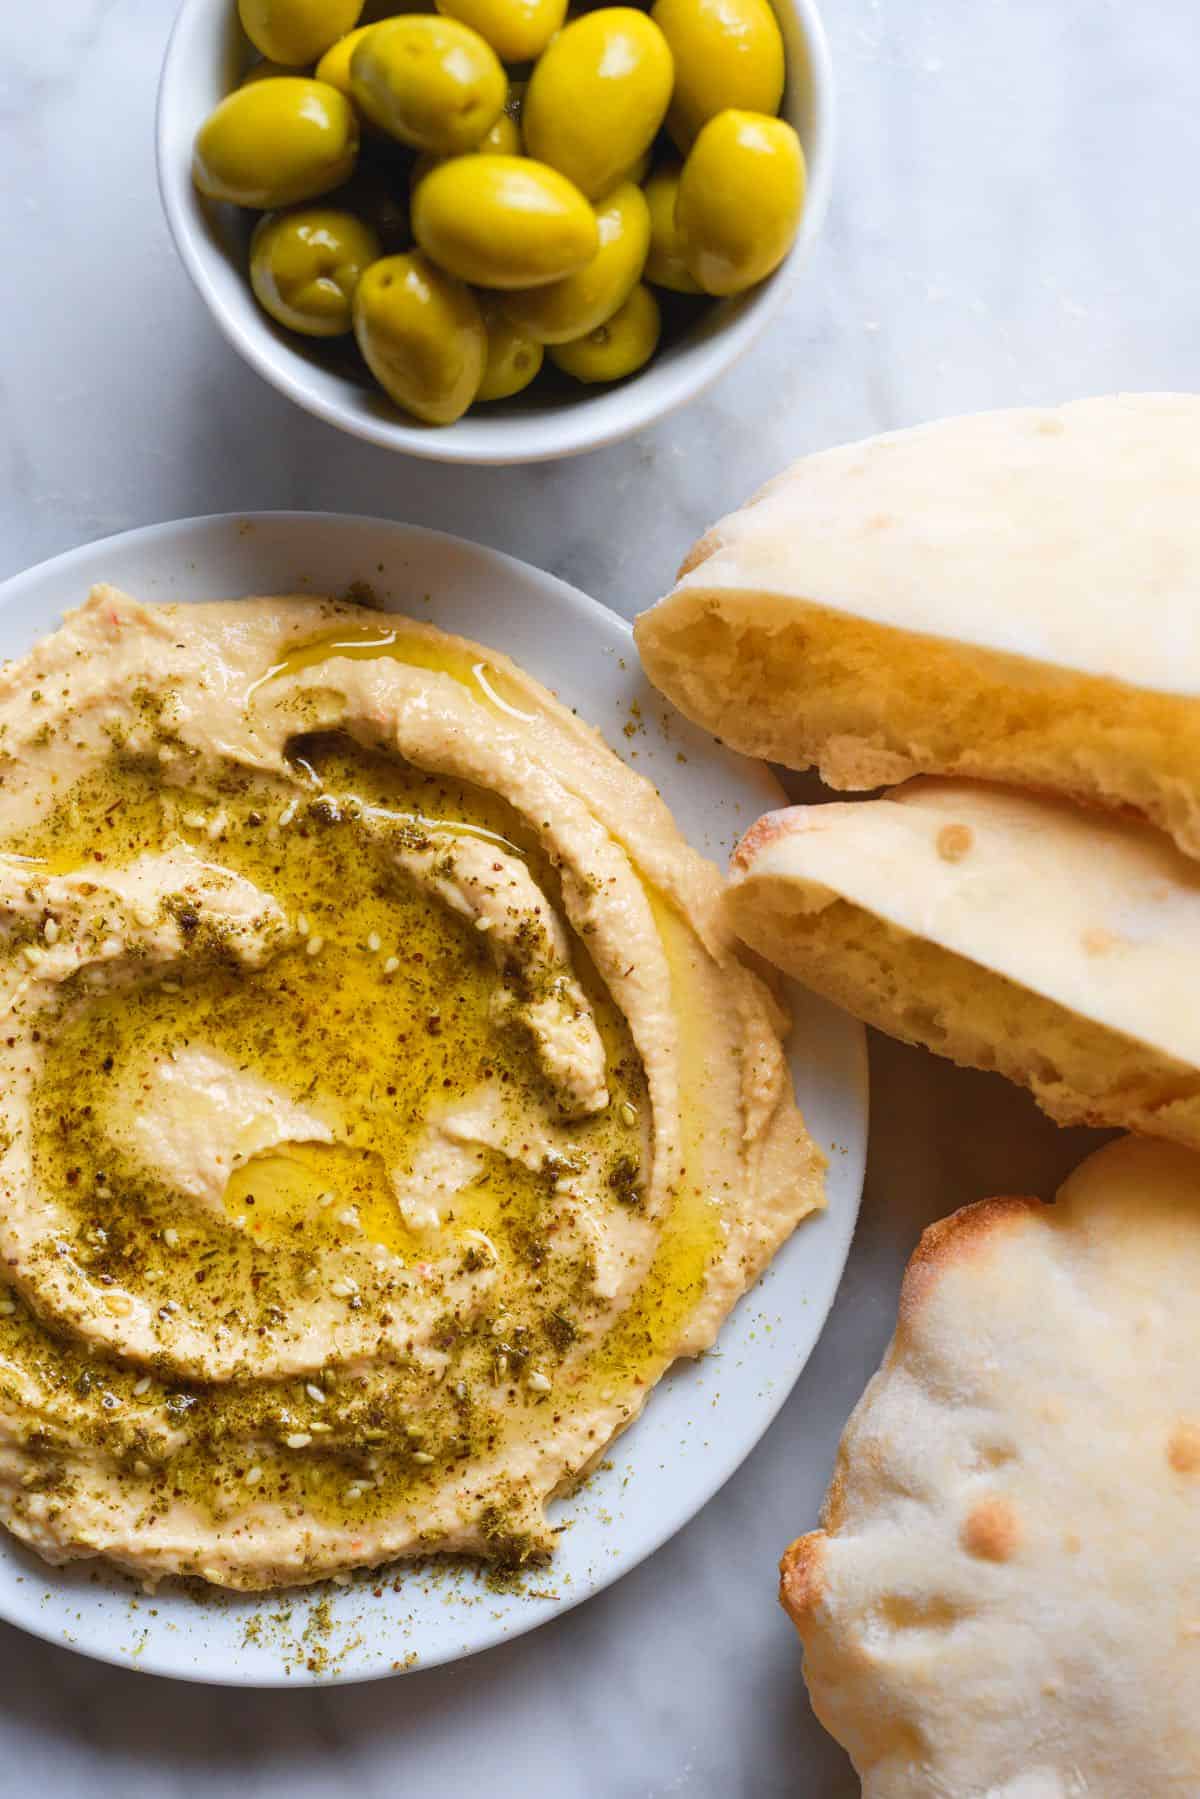 Homemade pita bread with hummus and olives